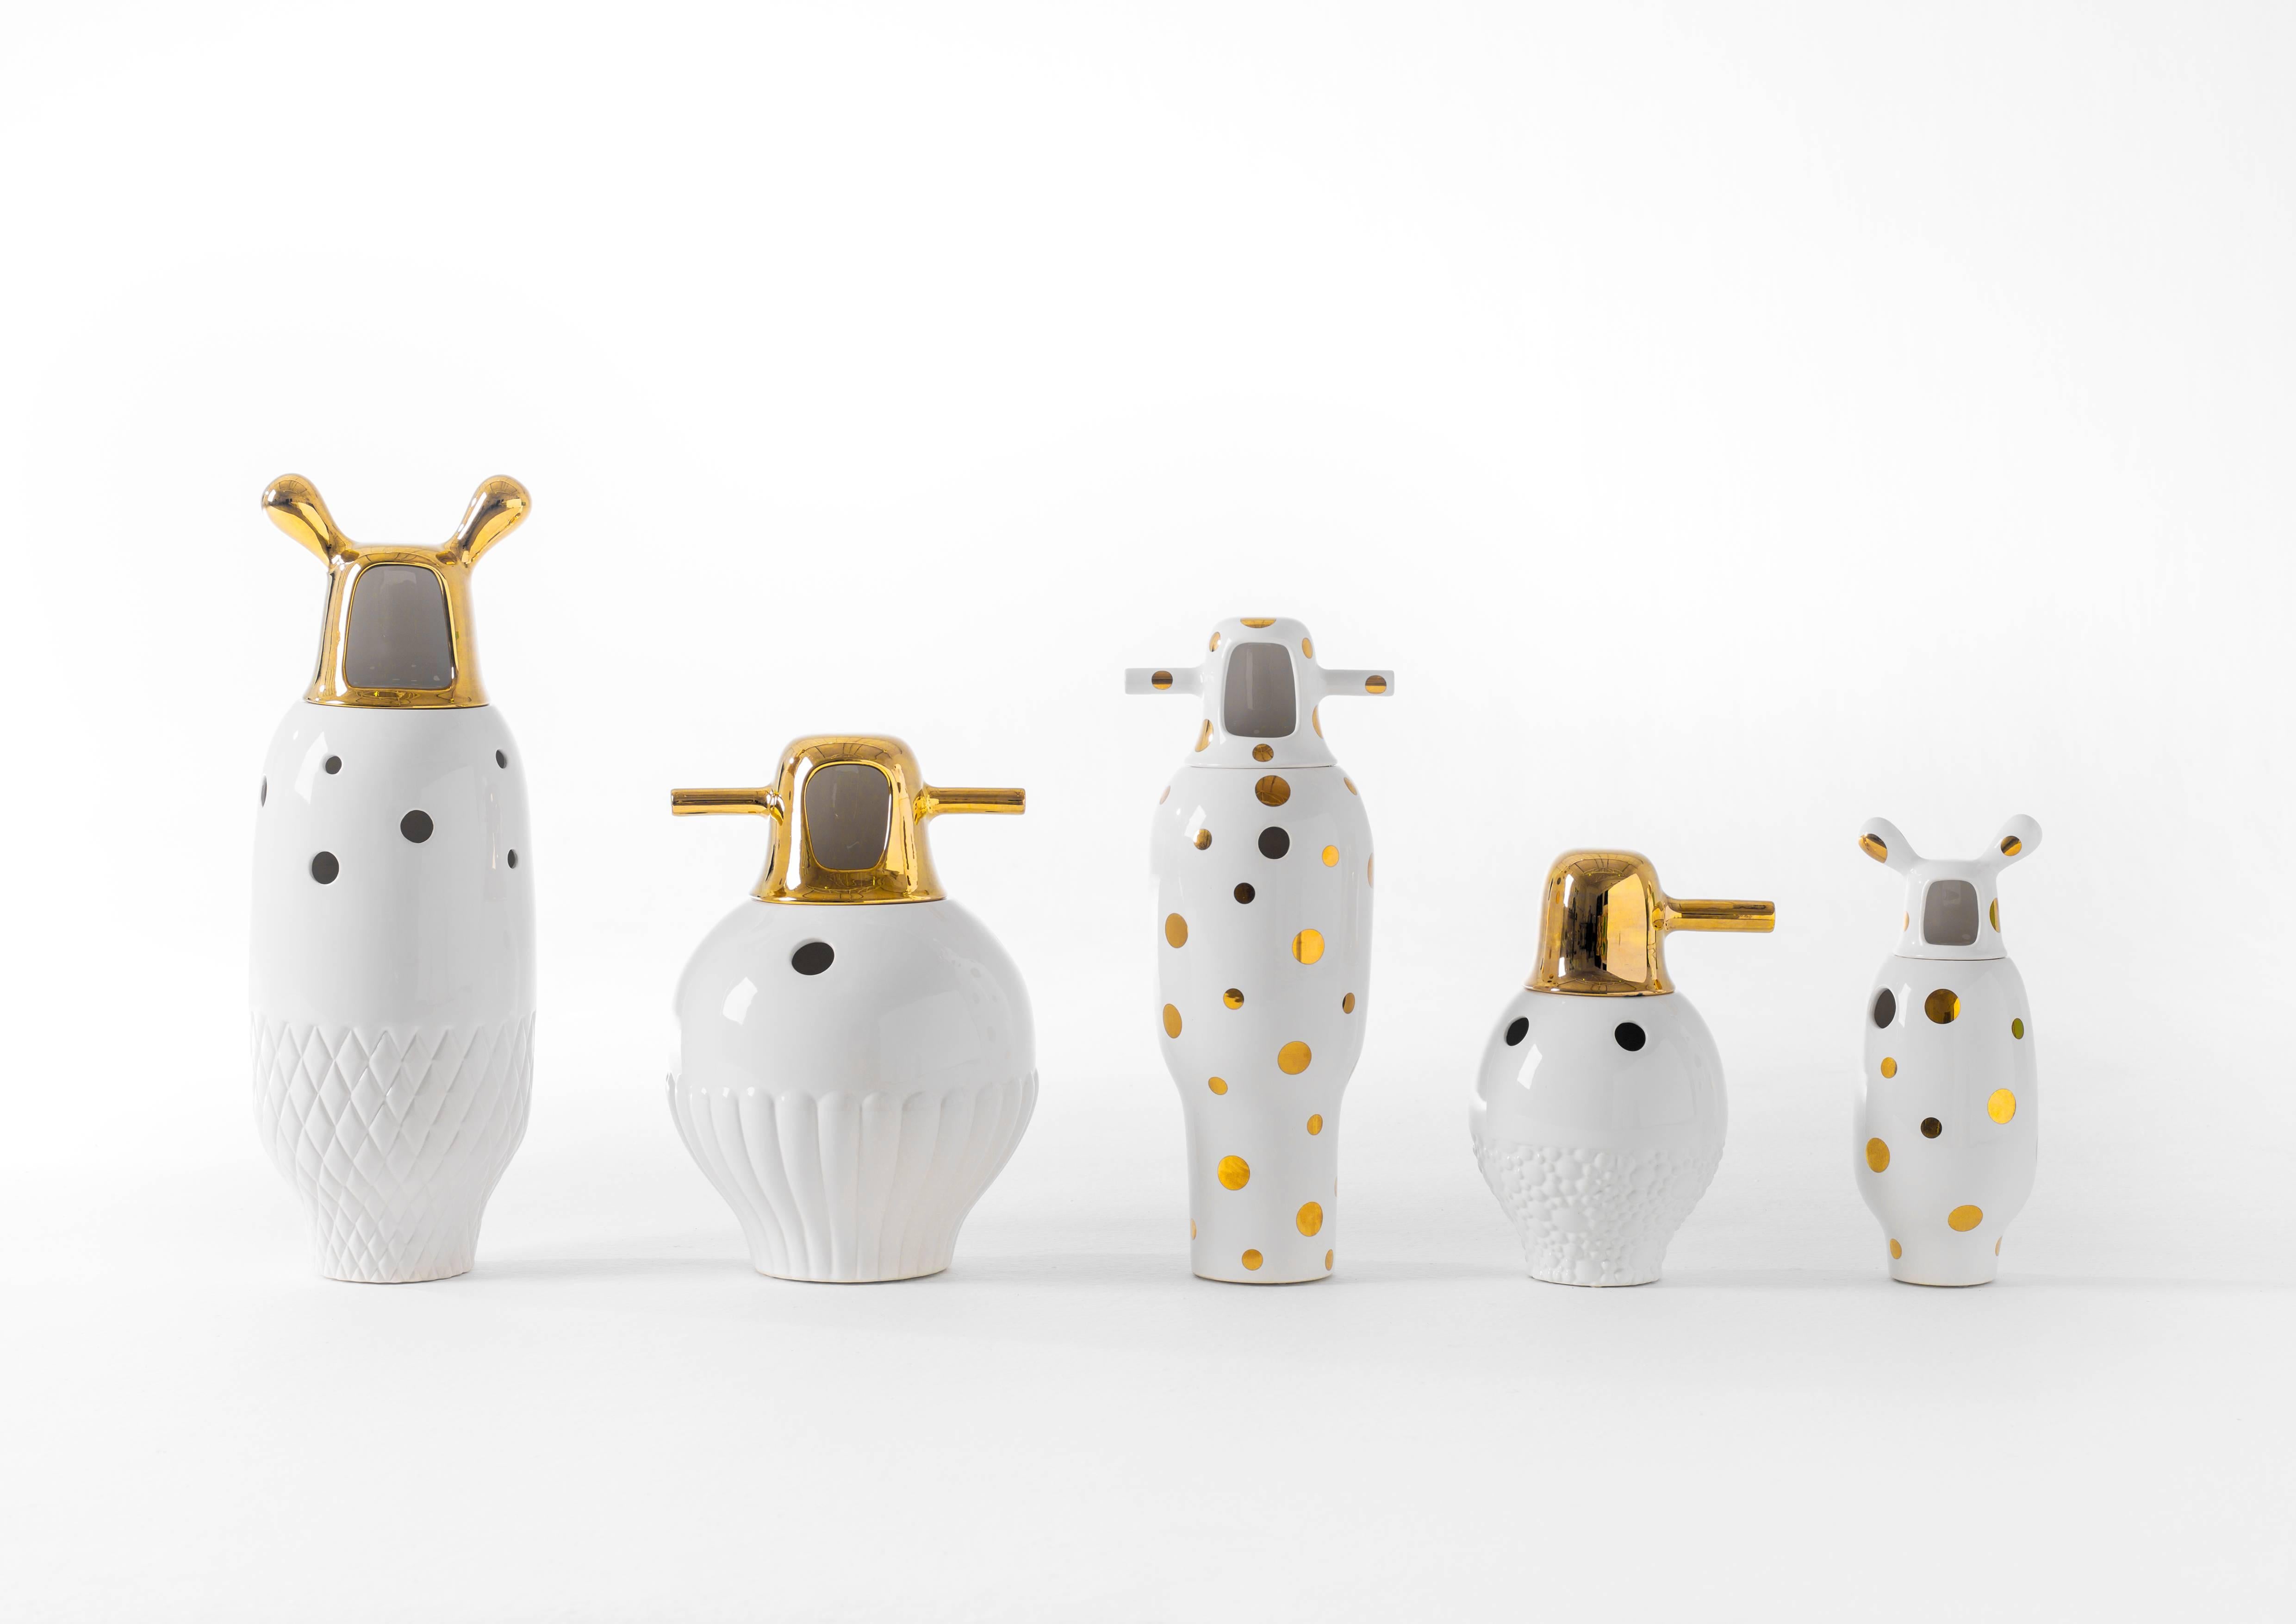 The Showtime vases by Jaime Hayon are the most iconic in BD’s catalogue. To celebrate the 10th anniversary of the Showtime Collection, we asked Jaime for new vase finishes. His proposal was a new white enamel finish with decorations in 24 carat